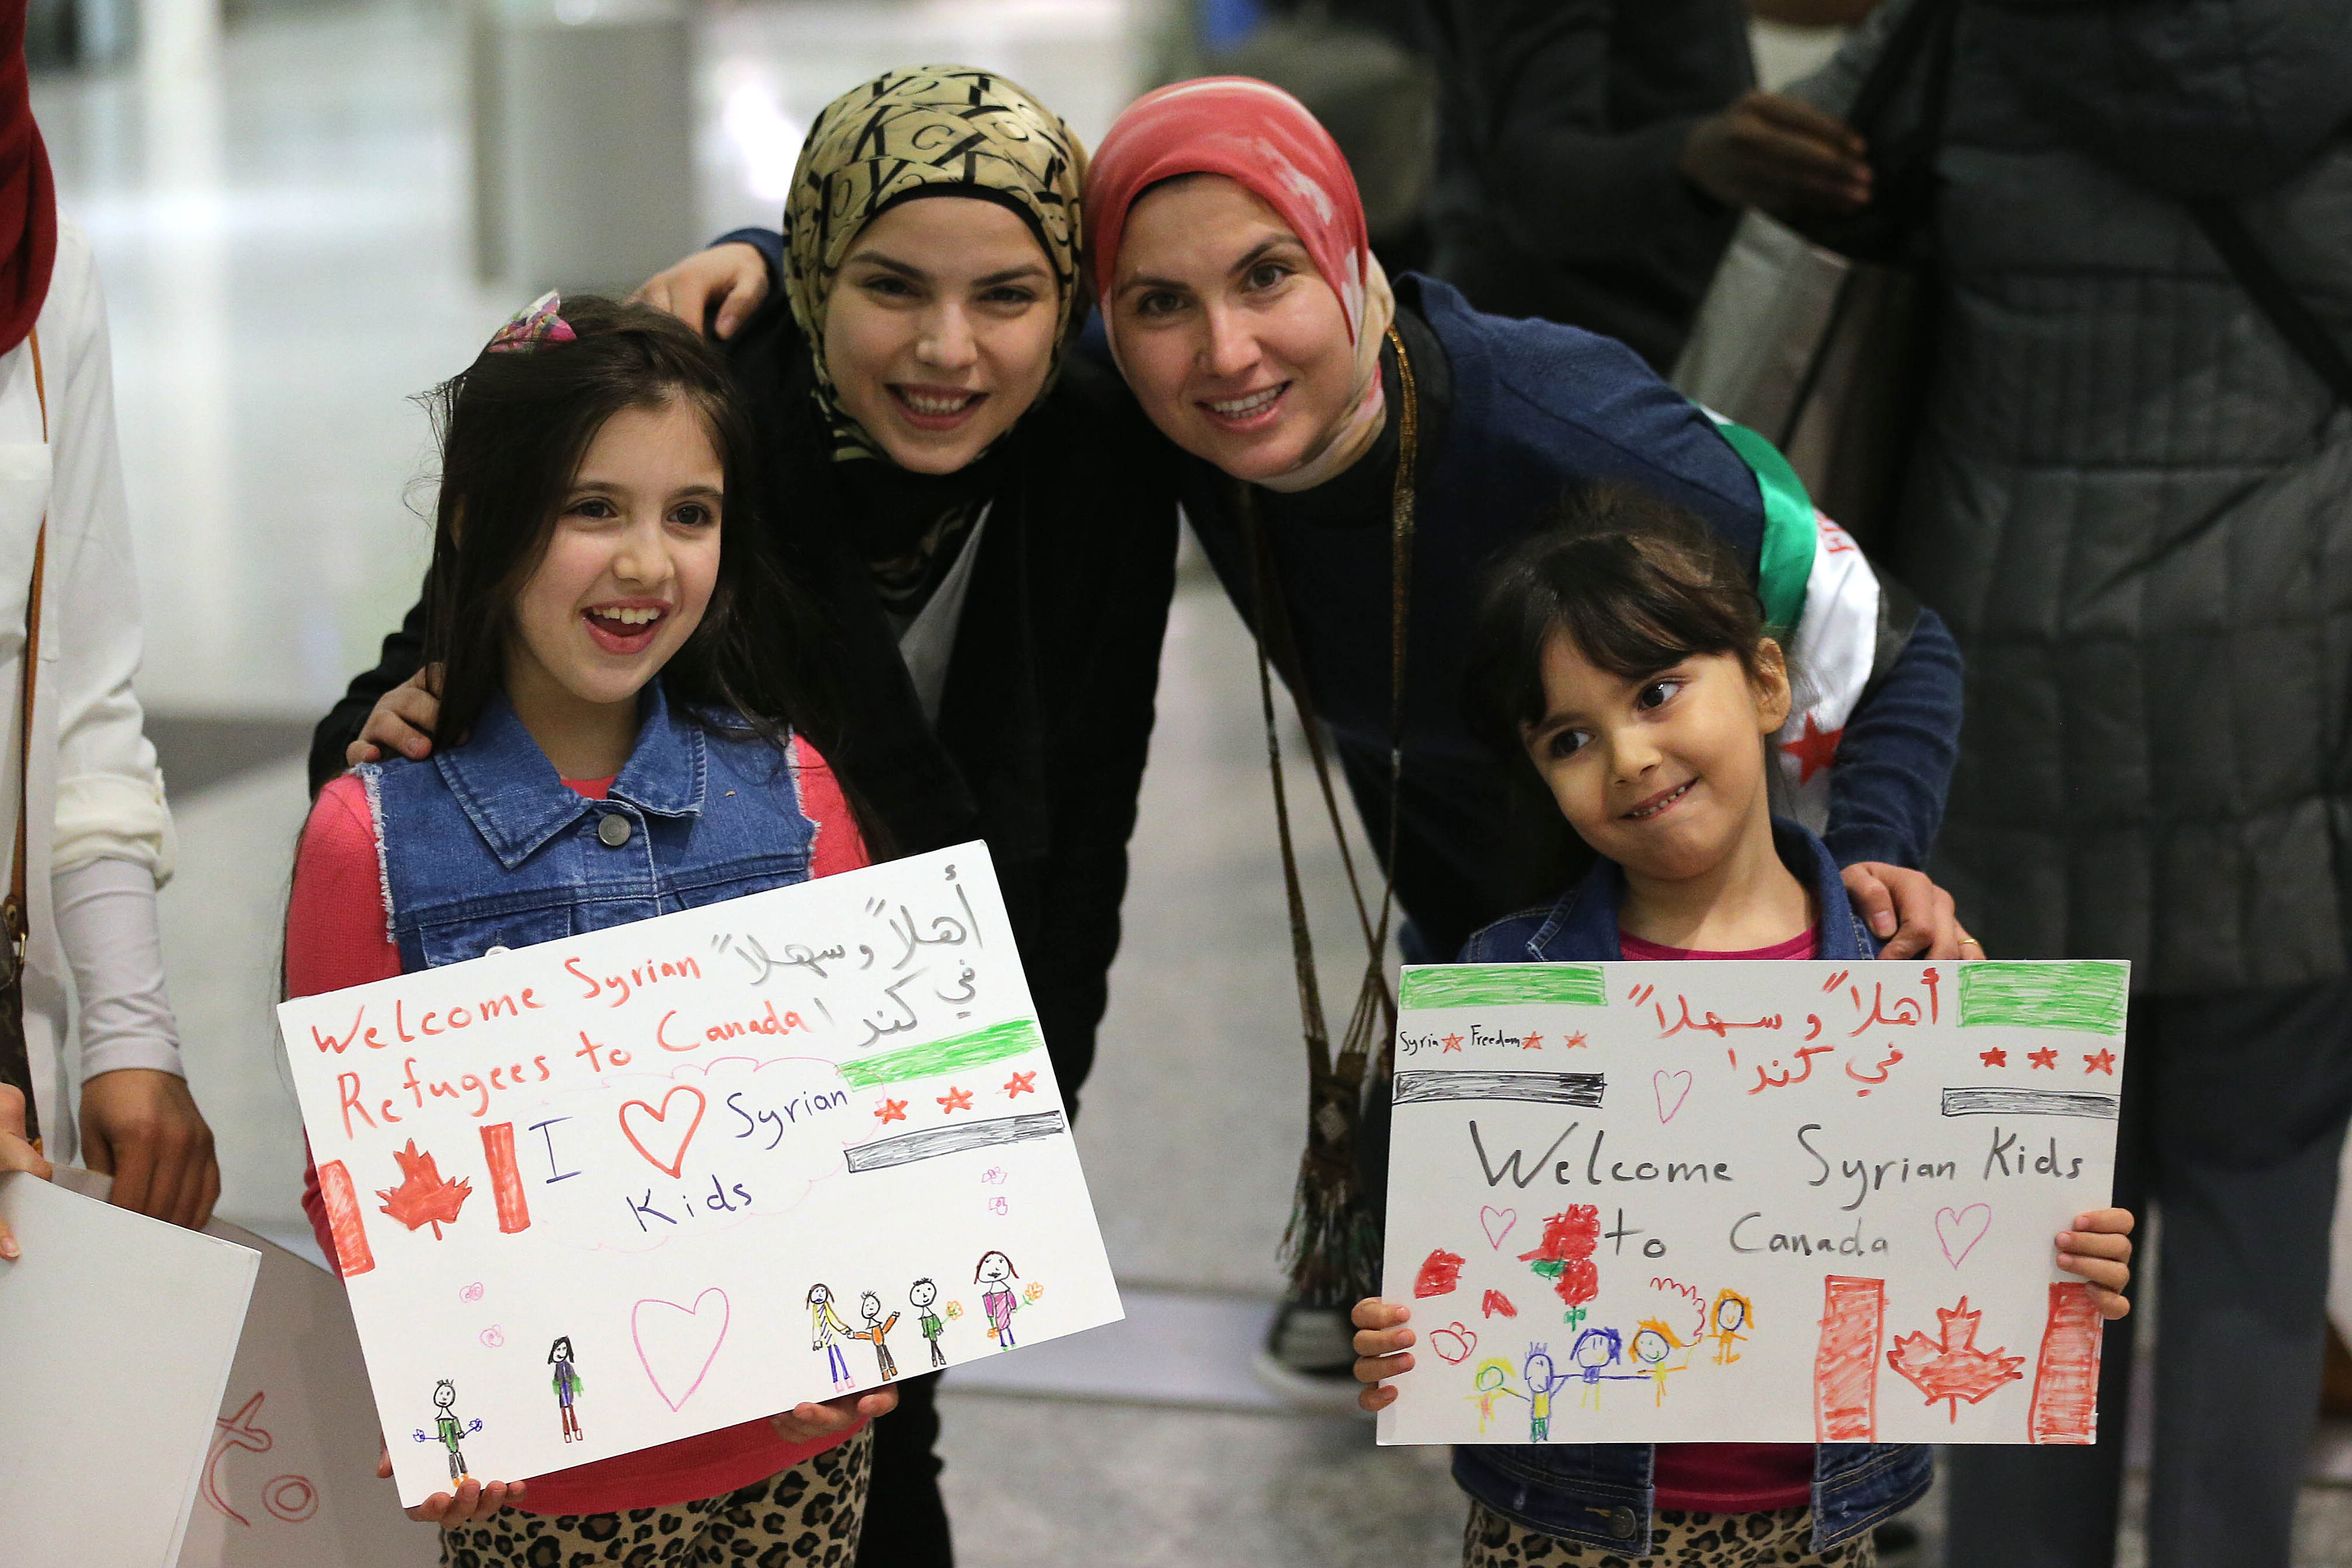 Syrian refugees begin to arrive in Canada